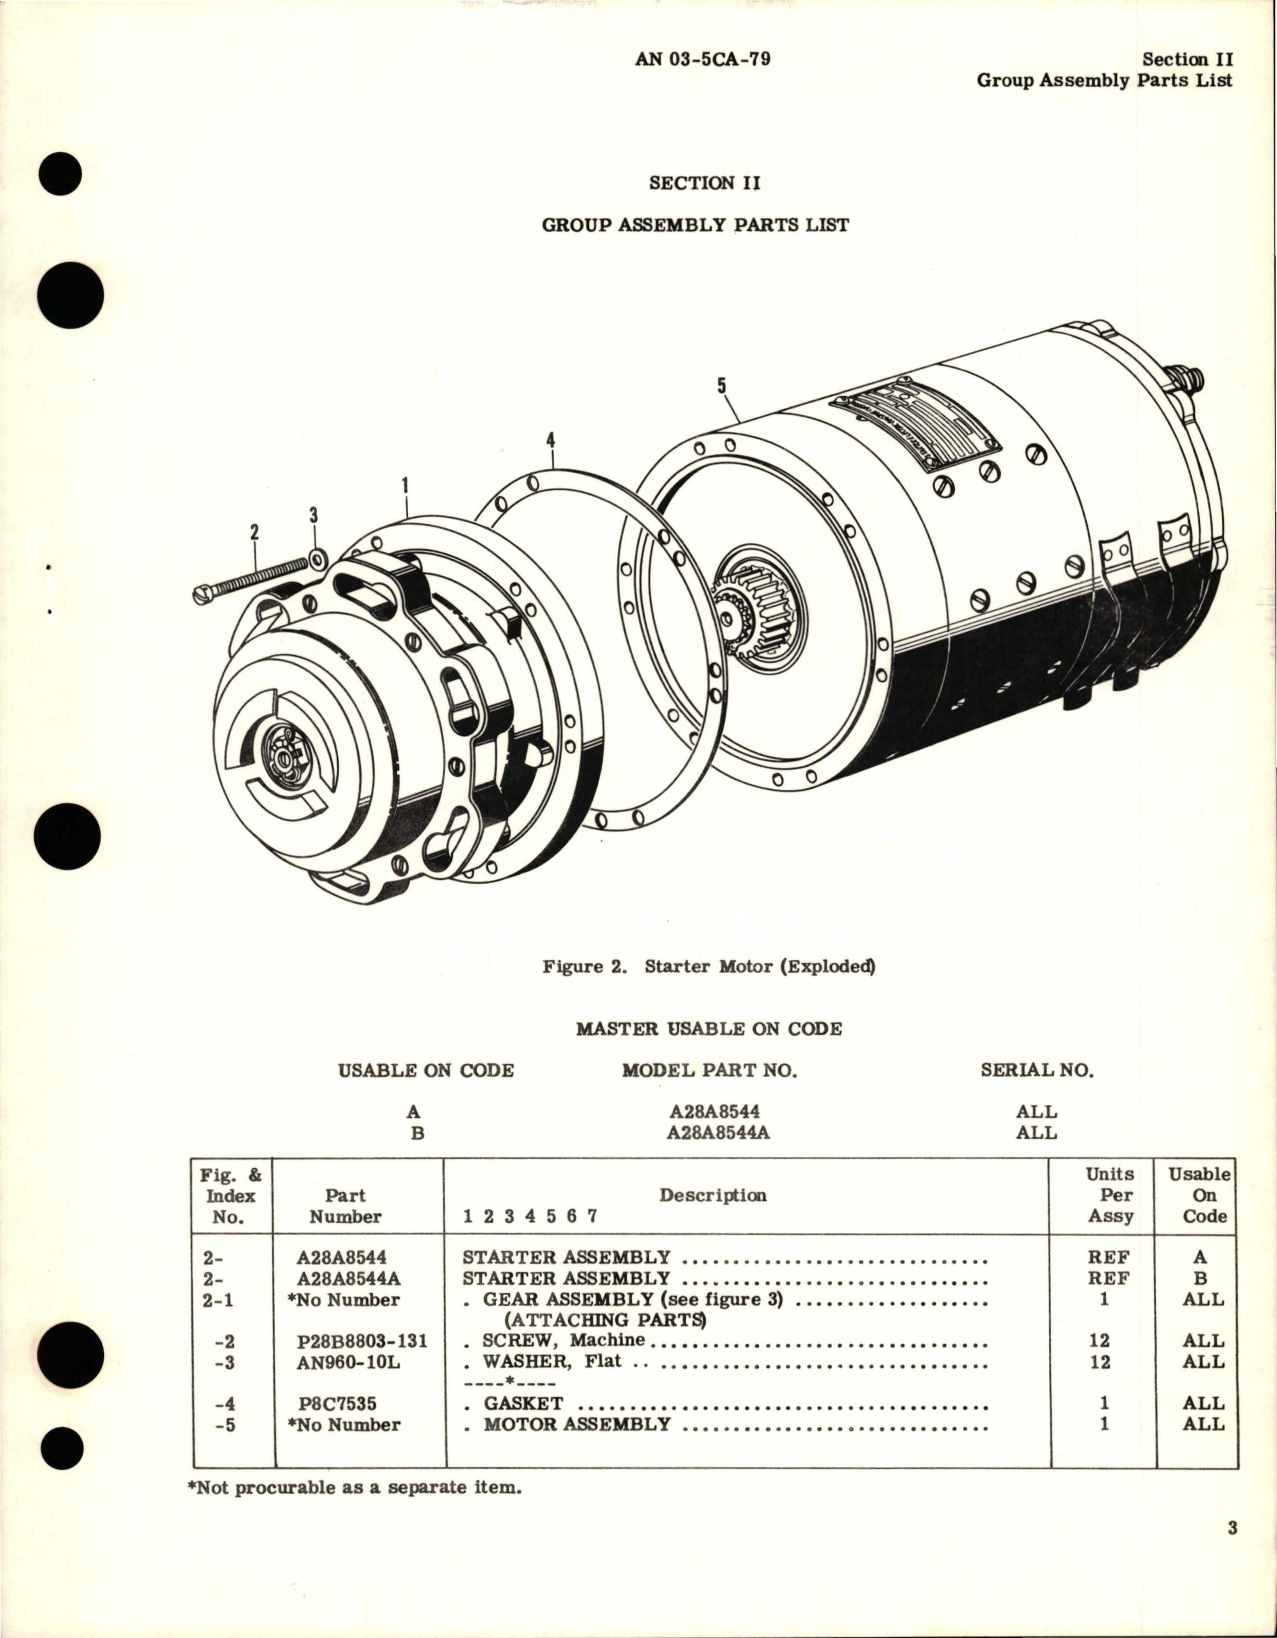 Sample page 5 from AirCorps Library document: Illustrated Parts Breakdown for Electric Starters (Gas Turbine Engines - J34-WE-34, J34-WE-36) - Models A28A8544, A28A8544A